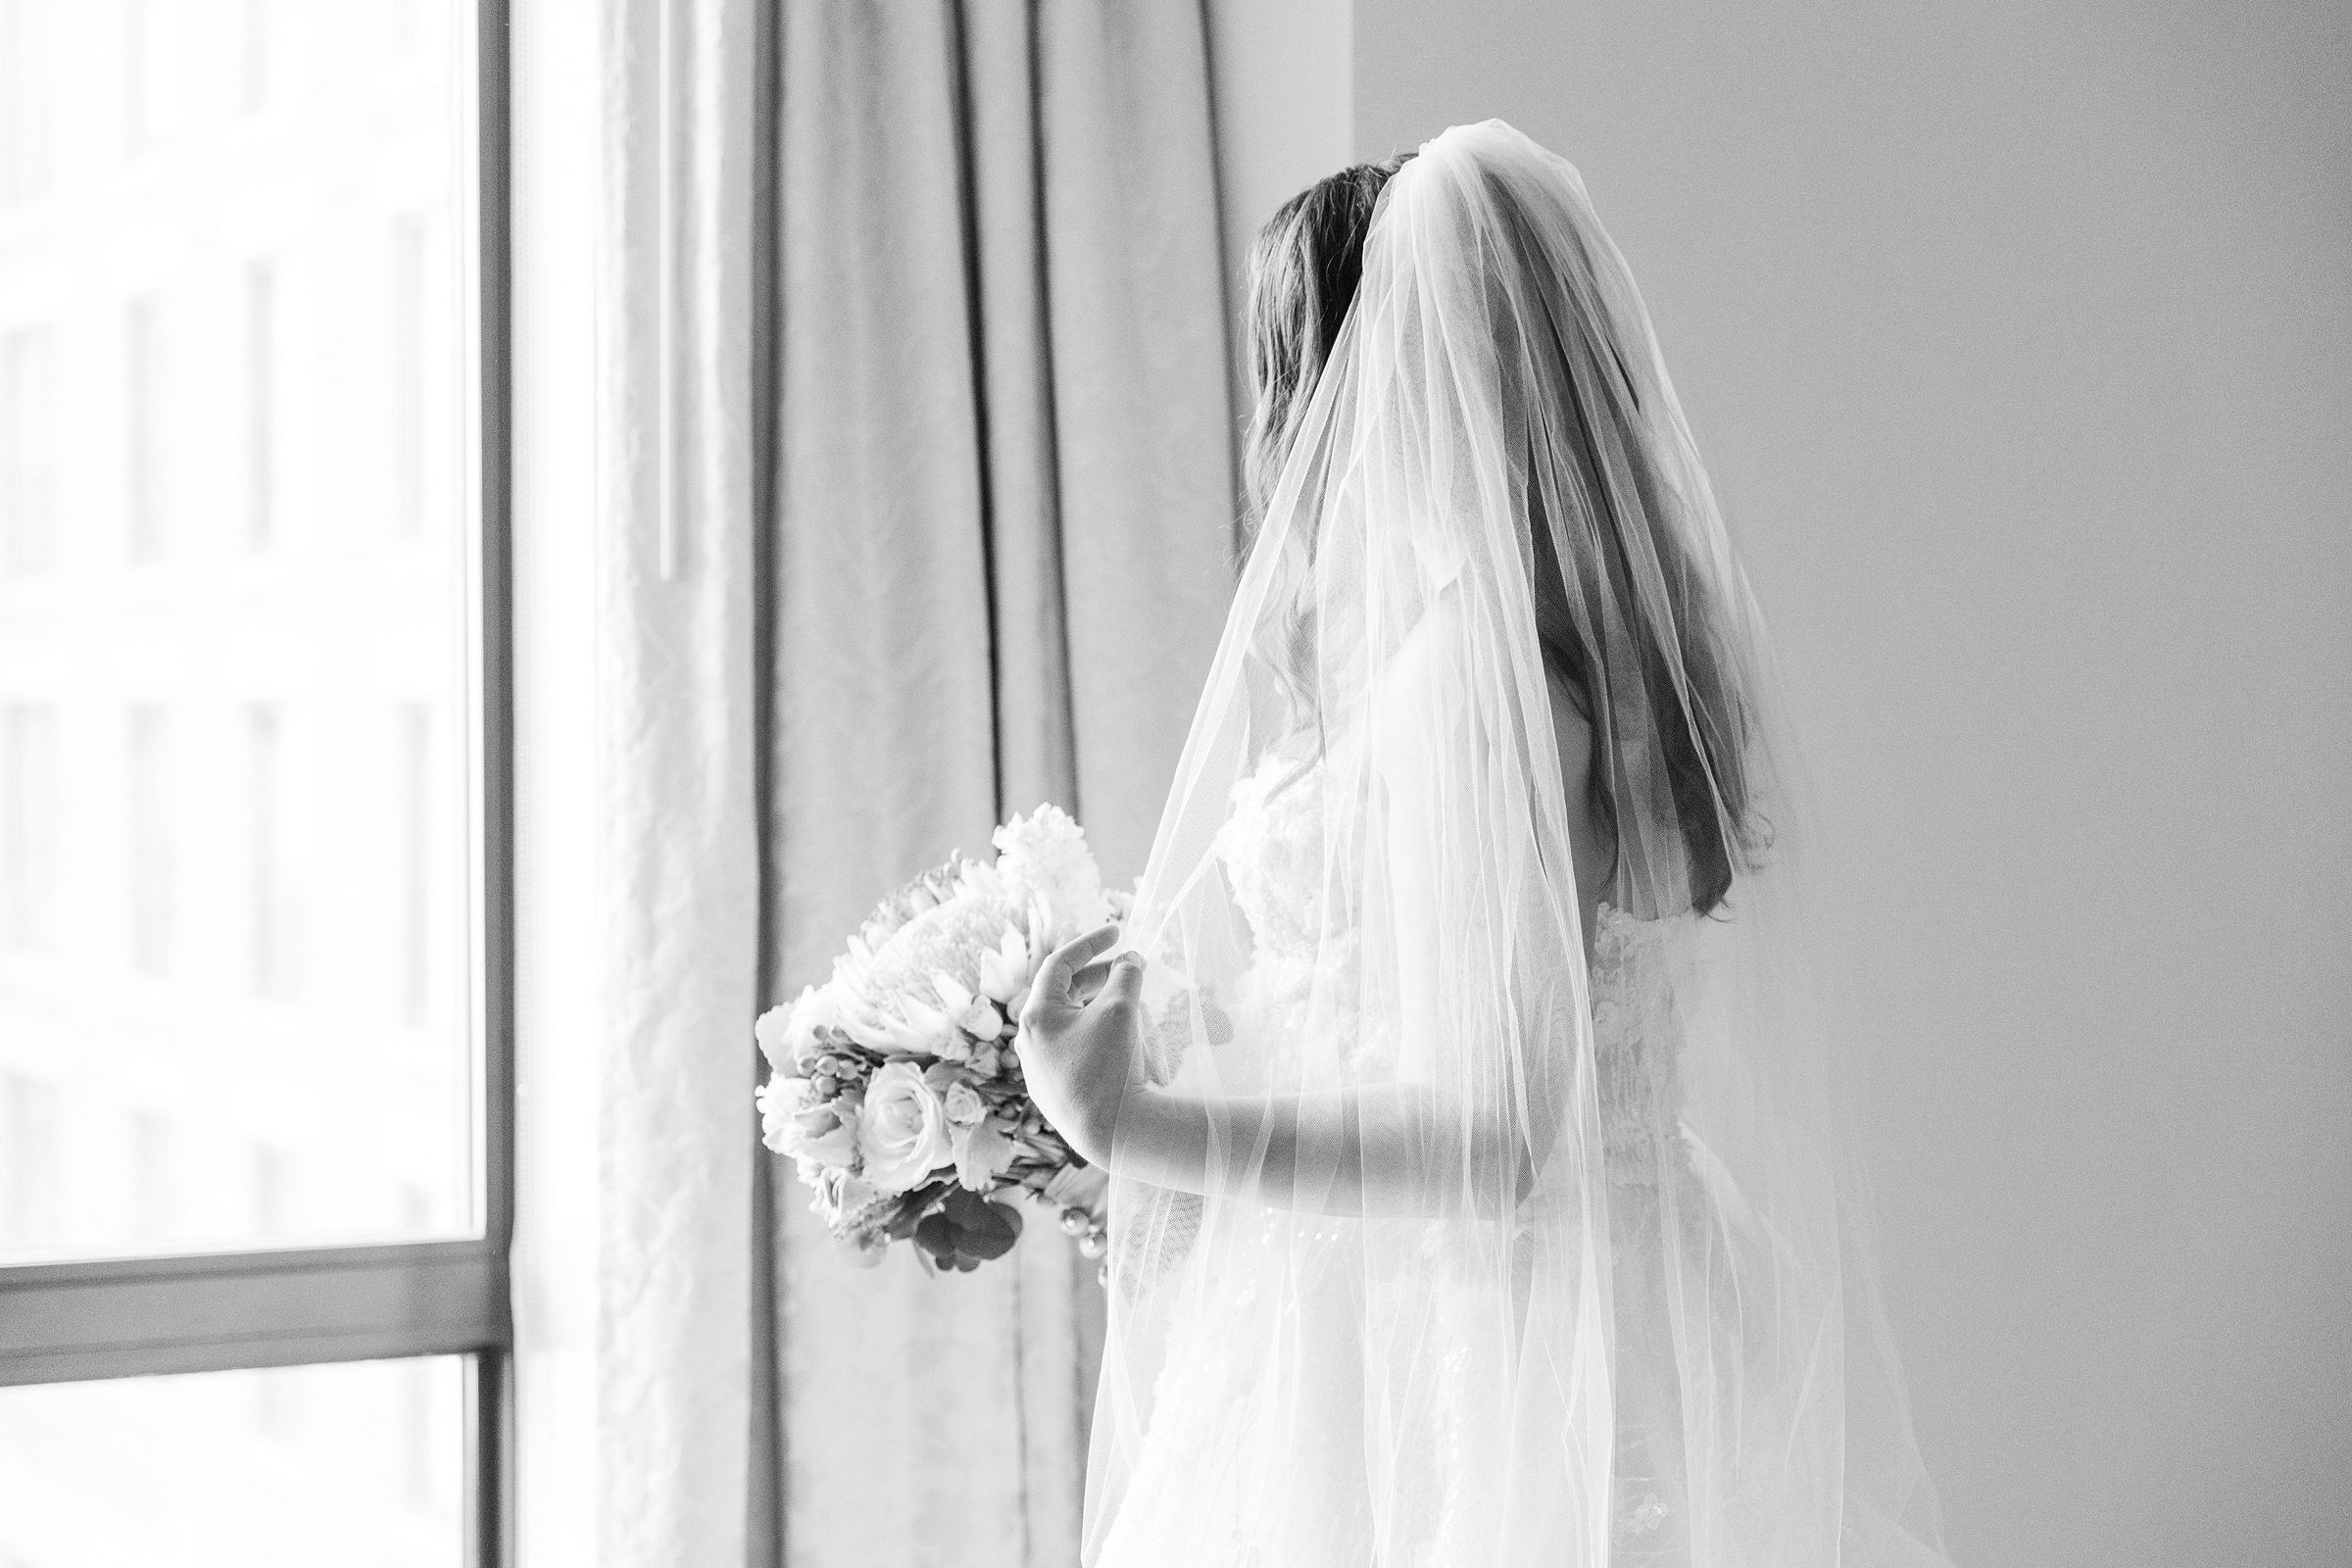 Sage Green Black Tie Wedding Day at the Four Seasons Washington DC Photographed by Baltimore Wedding Photographer Cait Kramer Photography